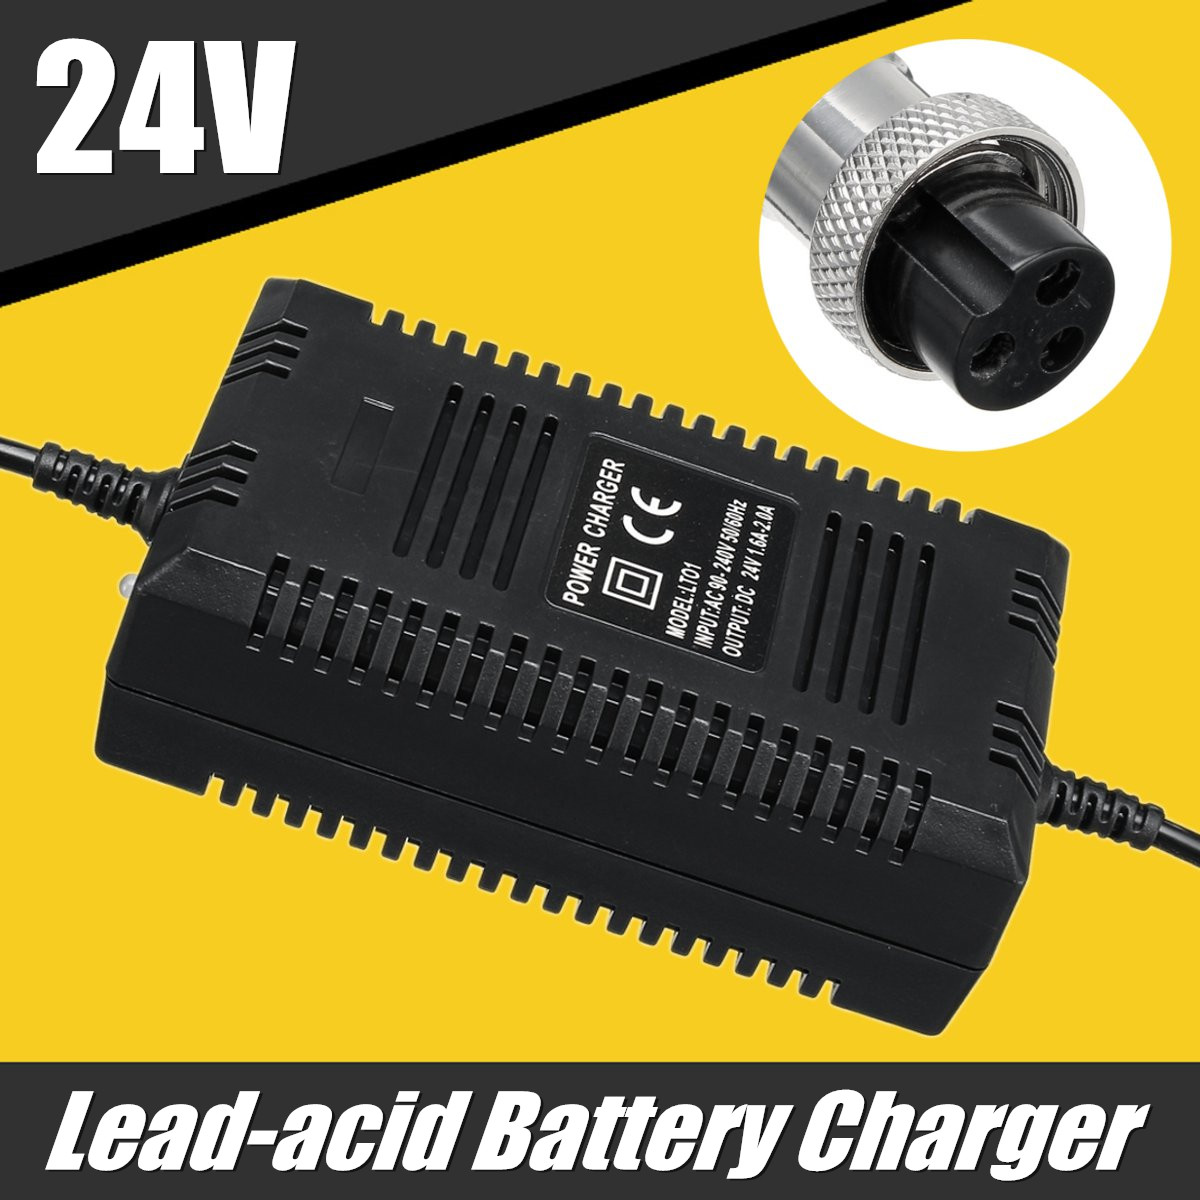 24V-20A-Lead-acid-Battery-Charger-Scooter-Charger-1374209-3